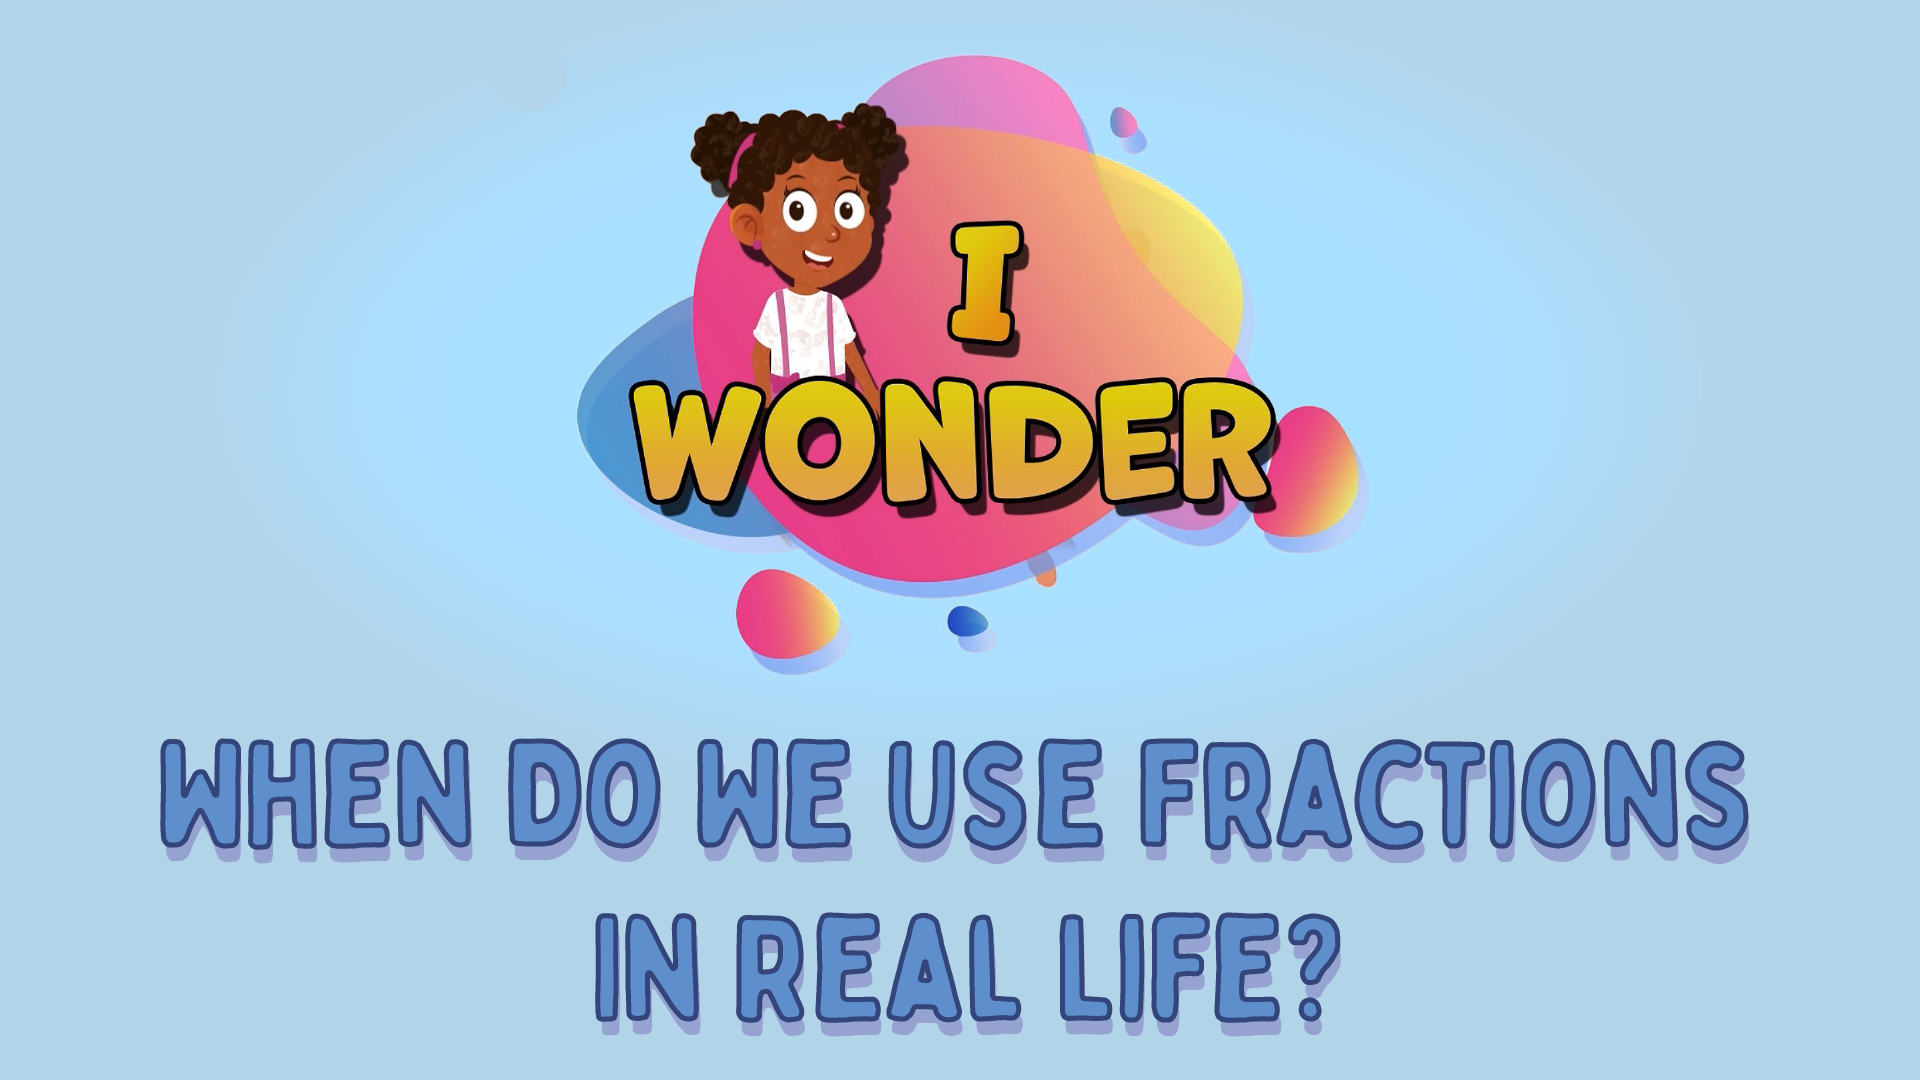 When Do We Use Fractions In Real Life?